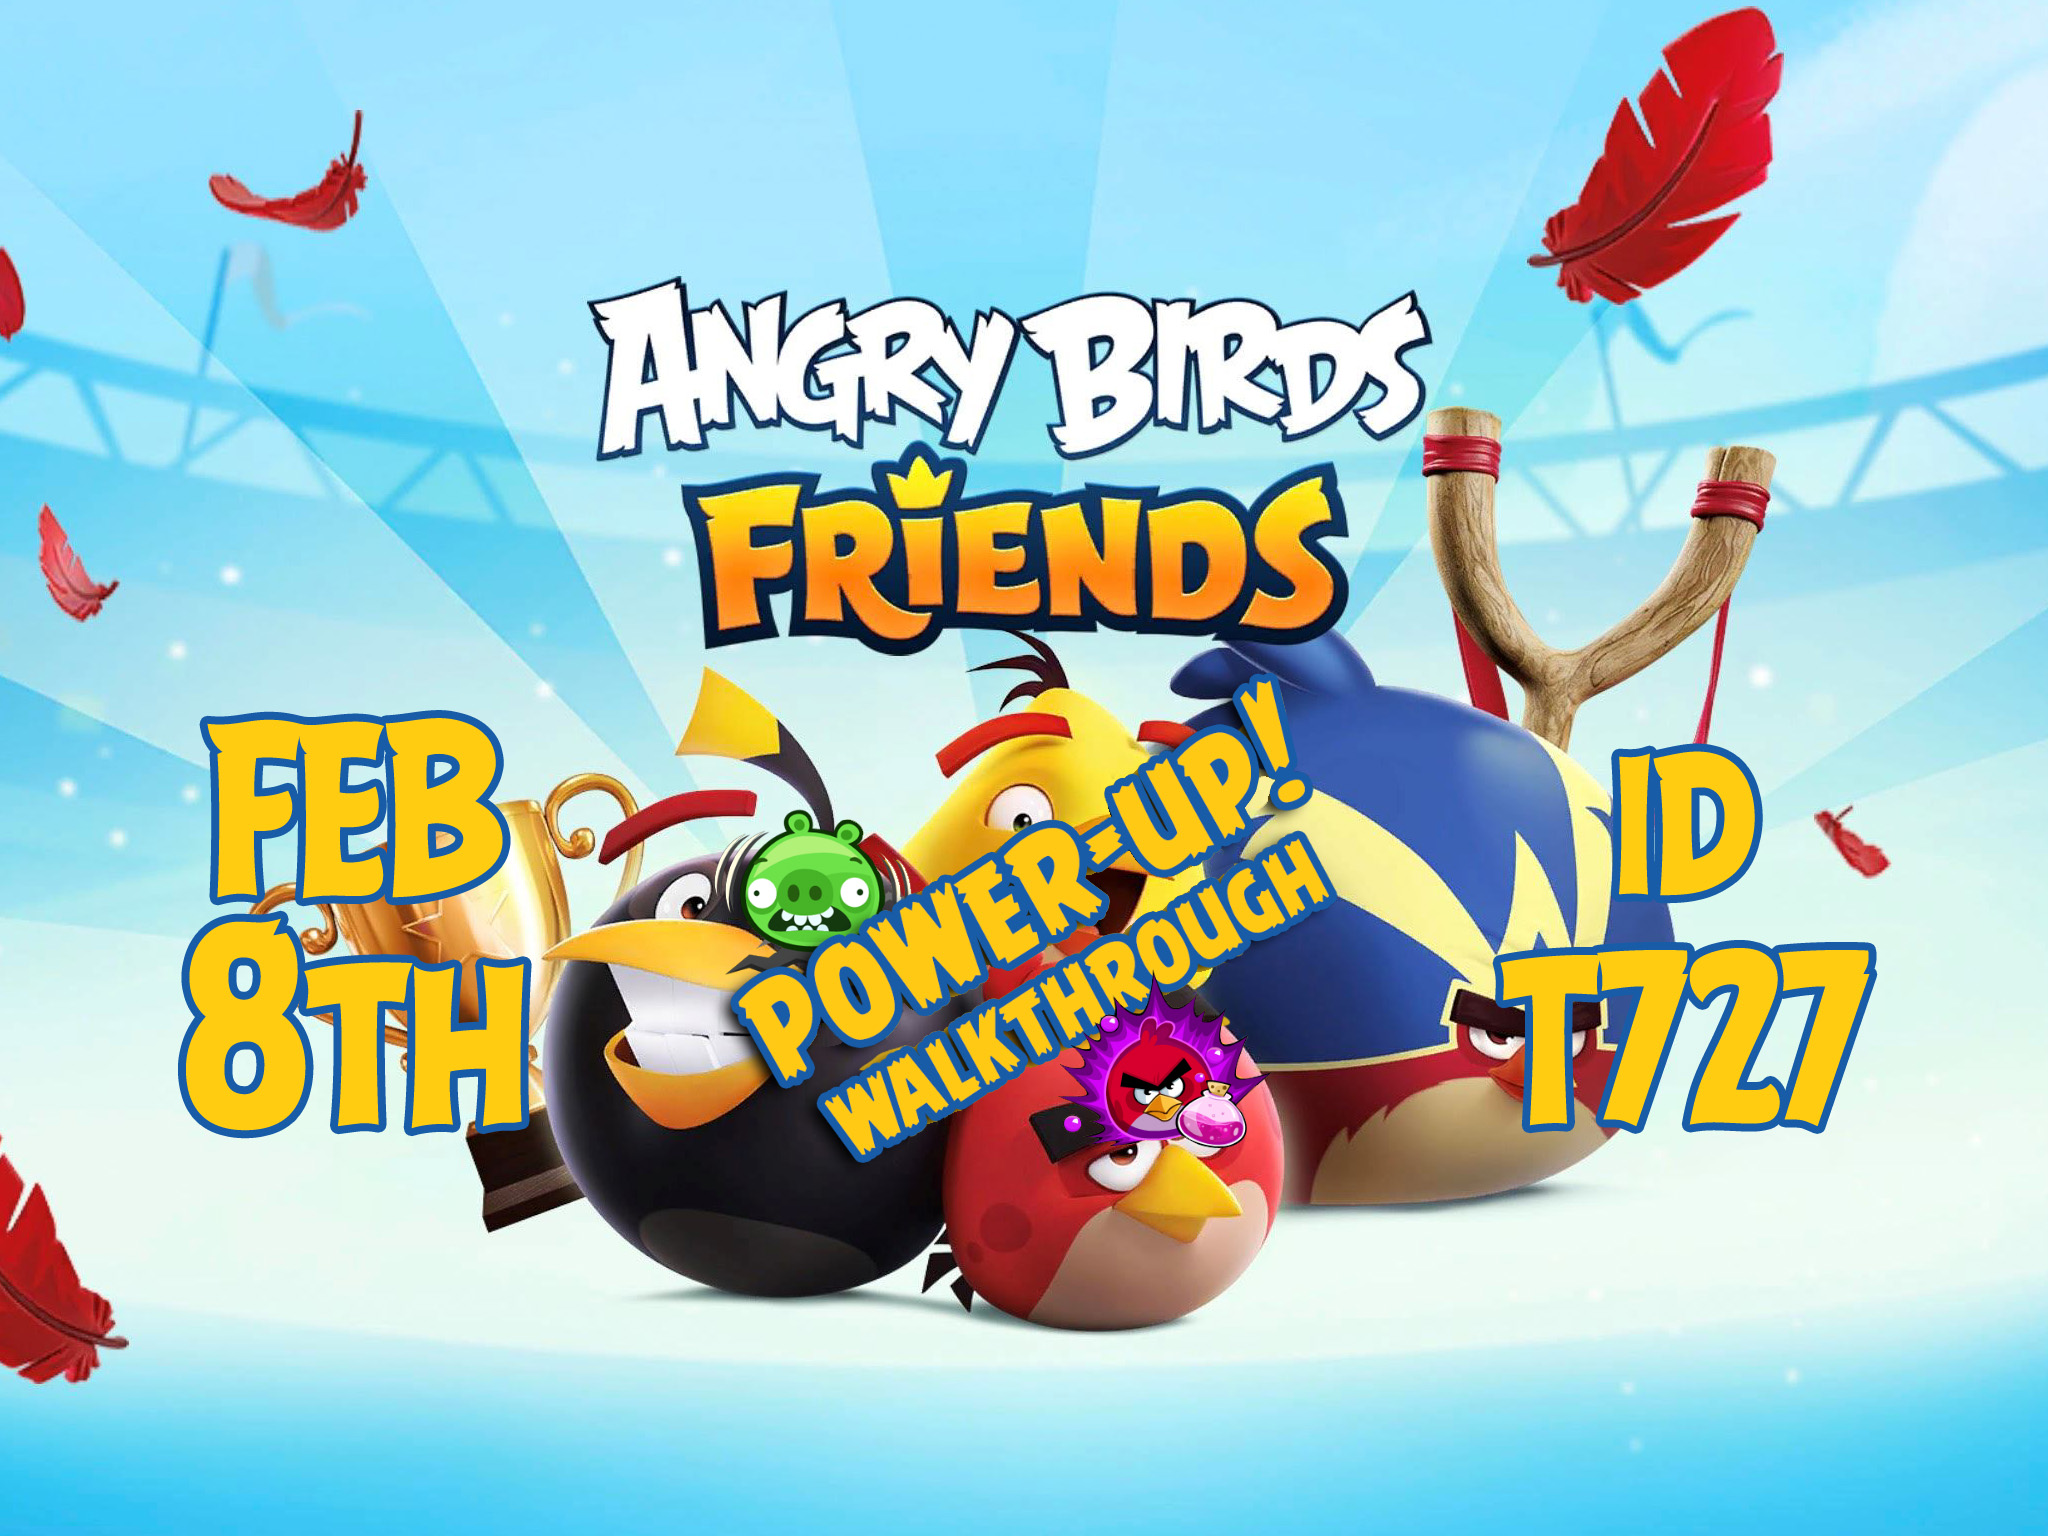 Angry-Birds-Friends-Tournament-T727-Feature-Image-PU